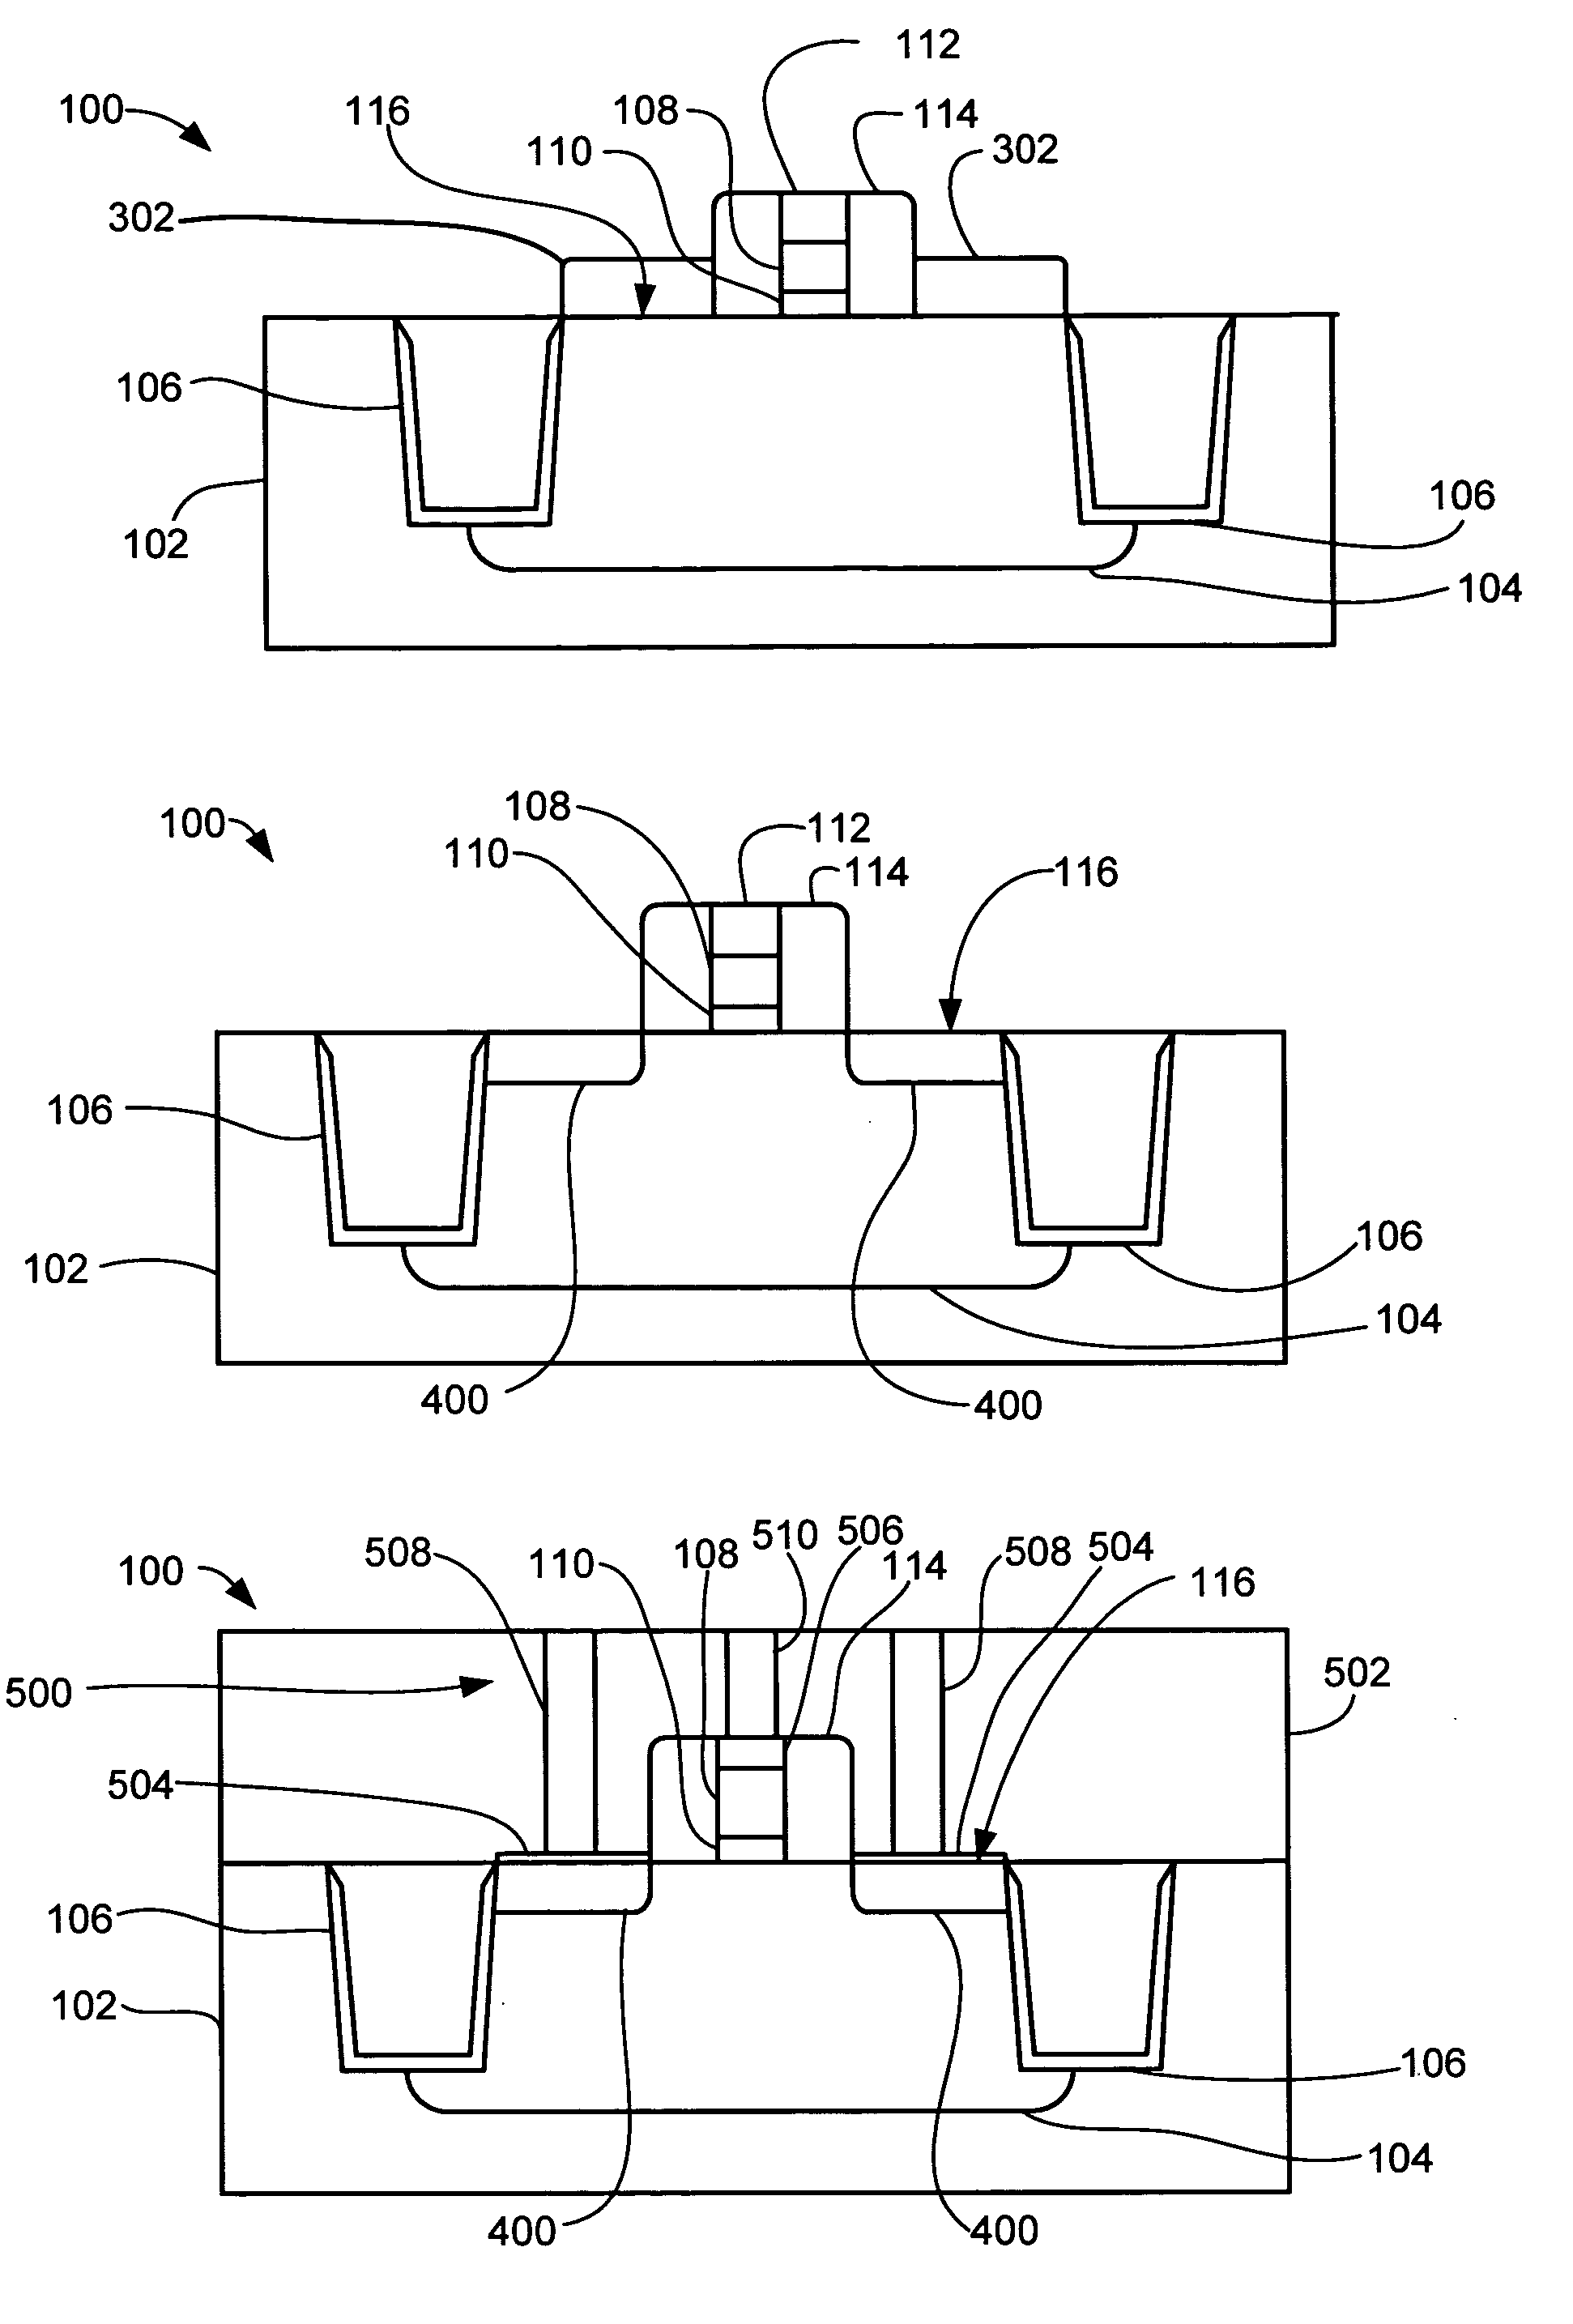 Method of manufacturing a semiconductor device with a strained channel